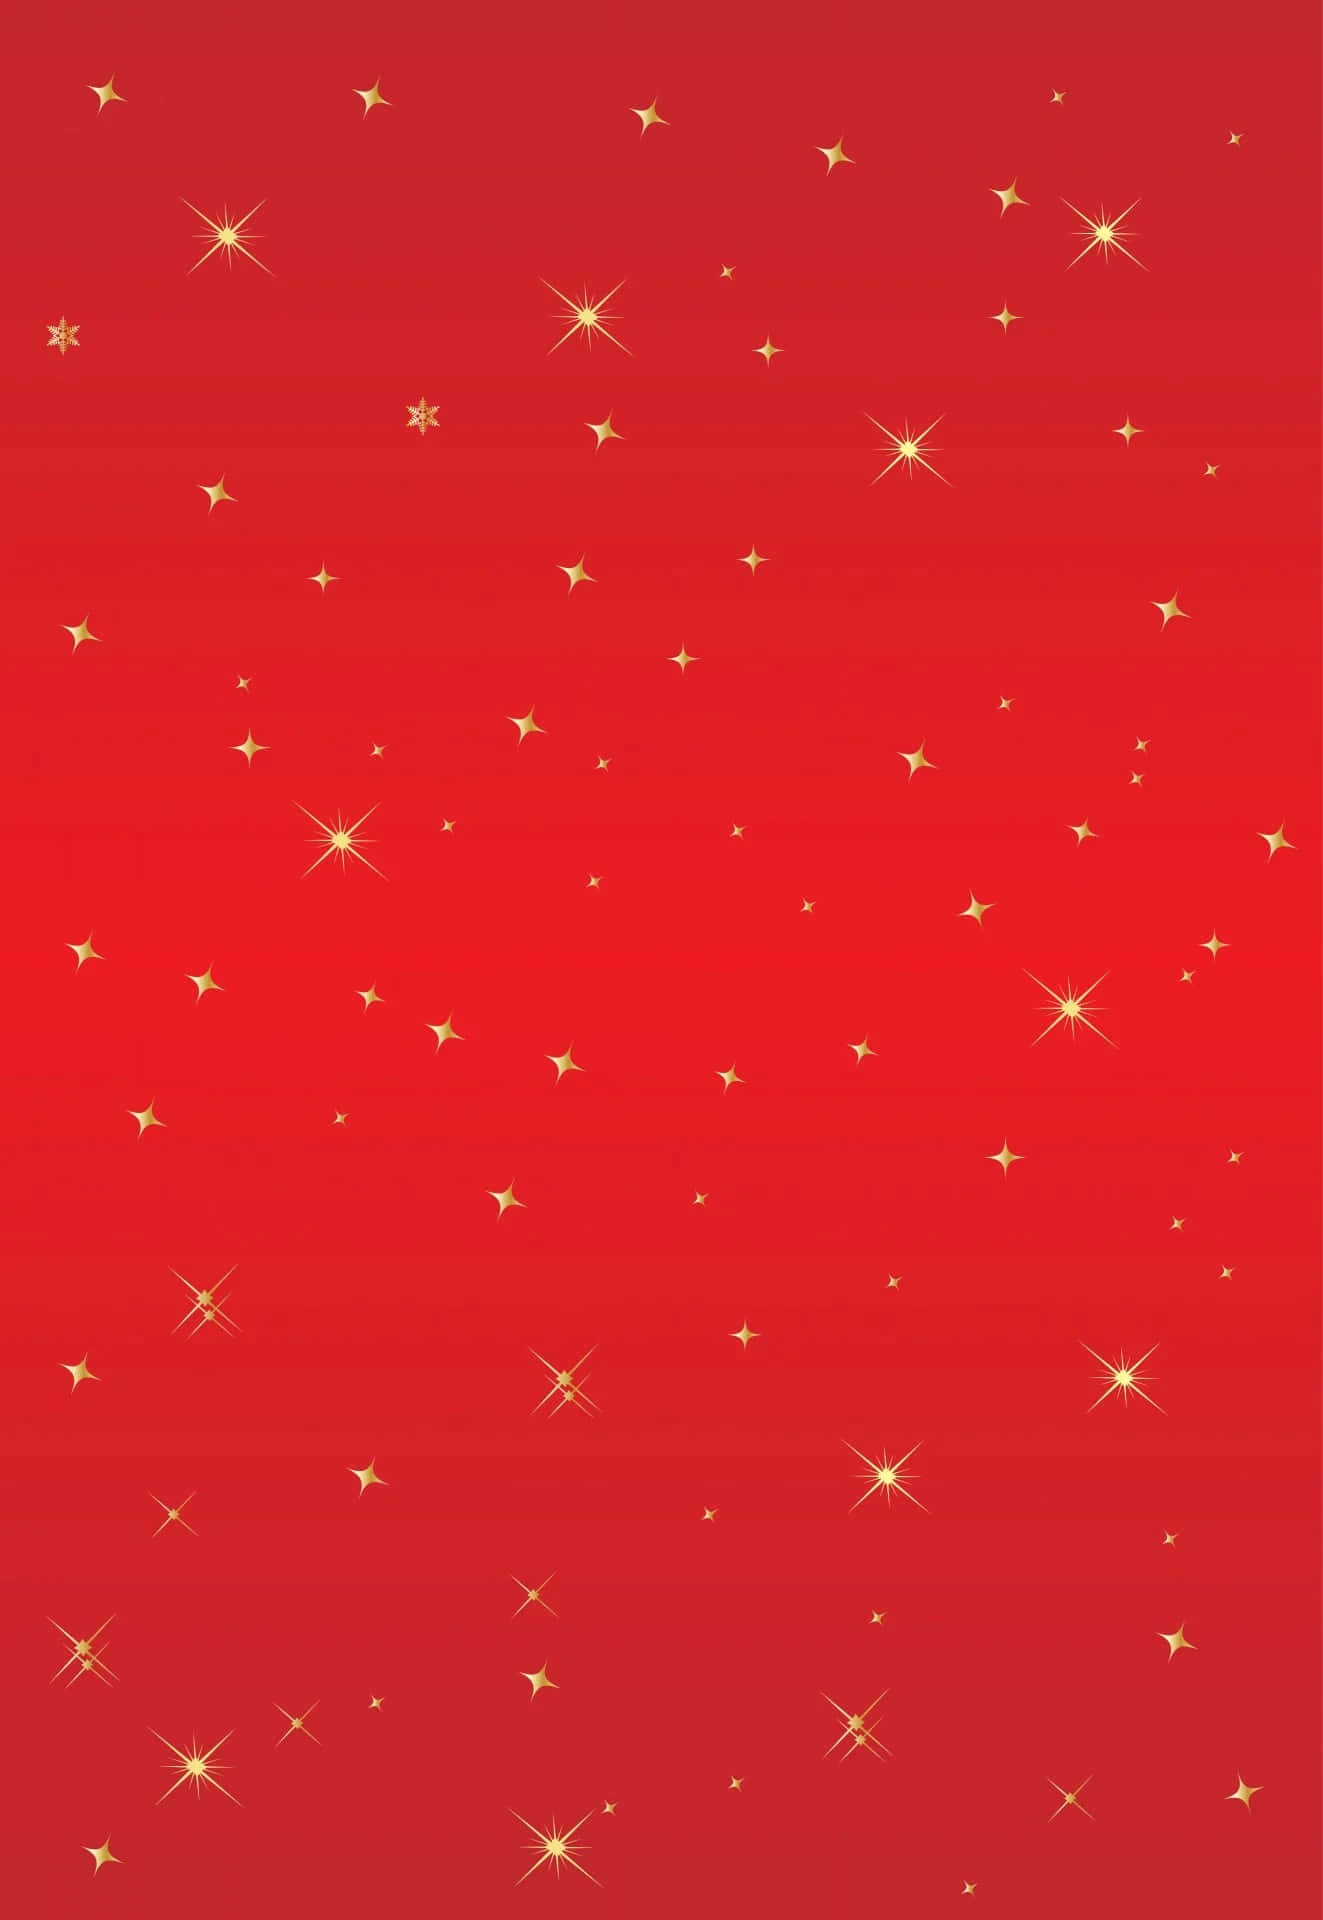 Chinese New Year Background With Stars